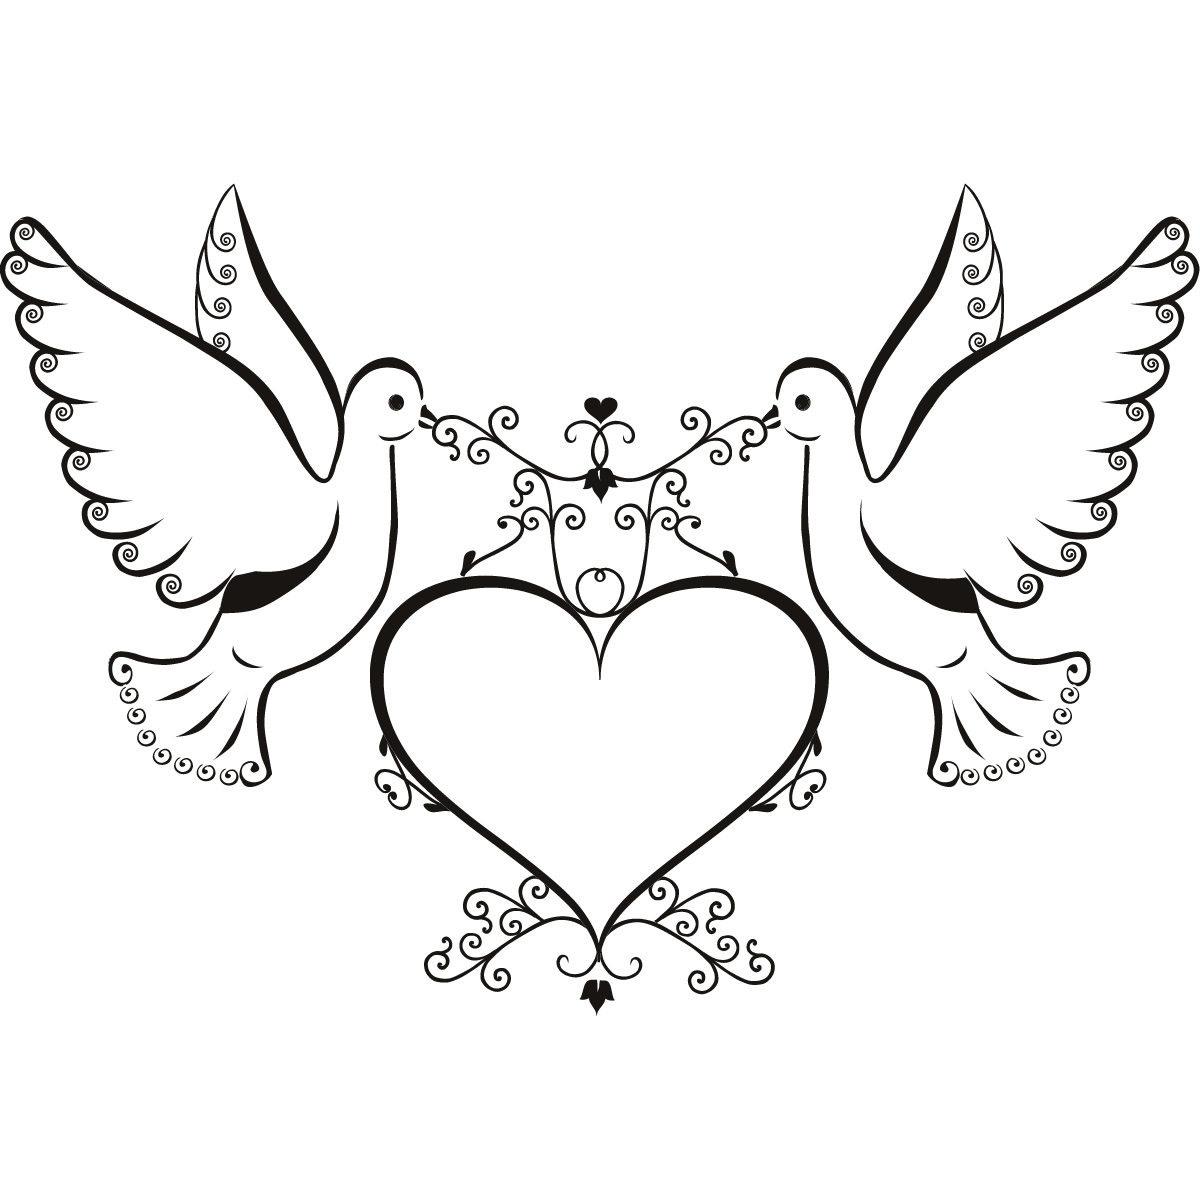 Doves And Love Heart Wall Art Sticker Wall Decals Transfers   Ebay